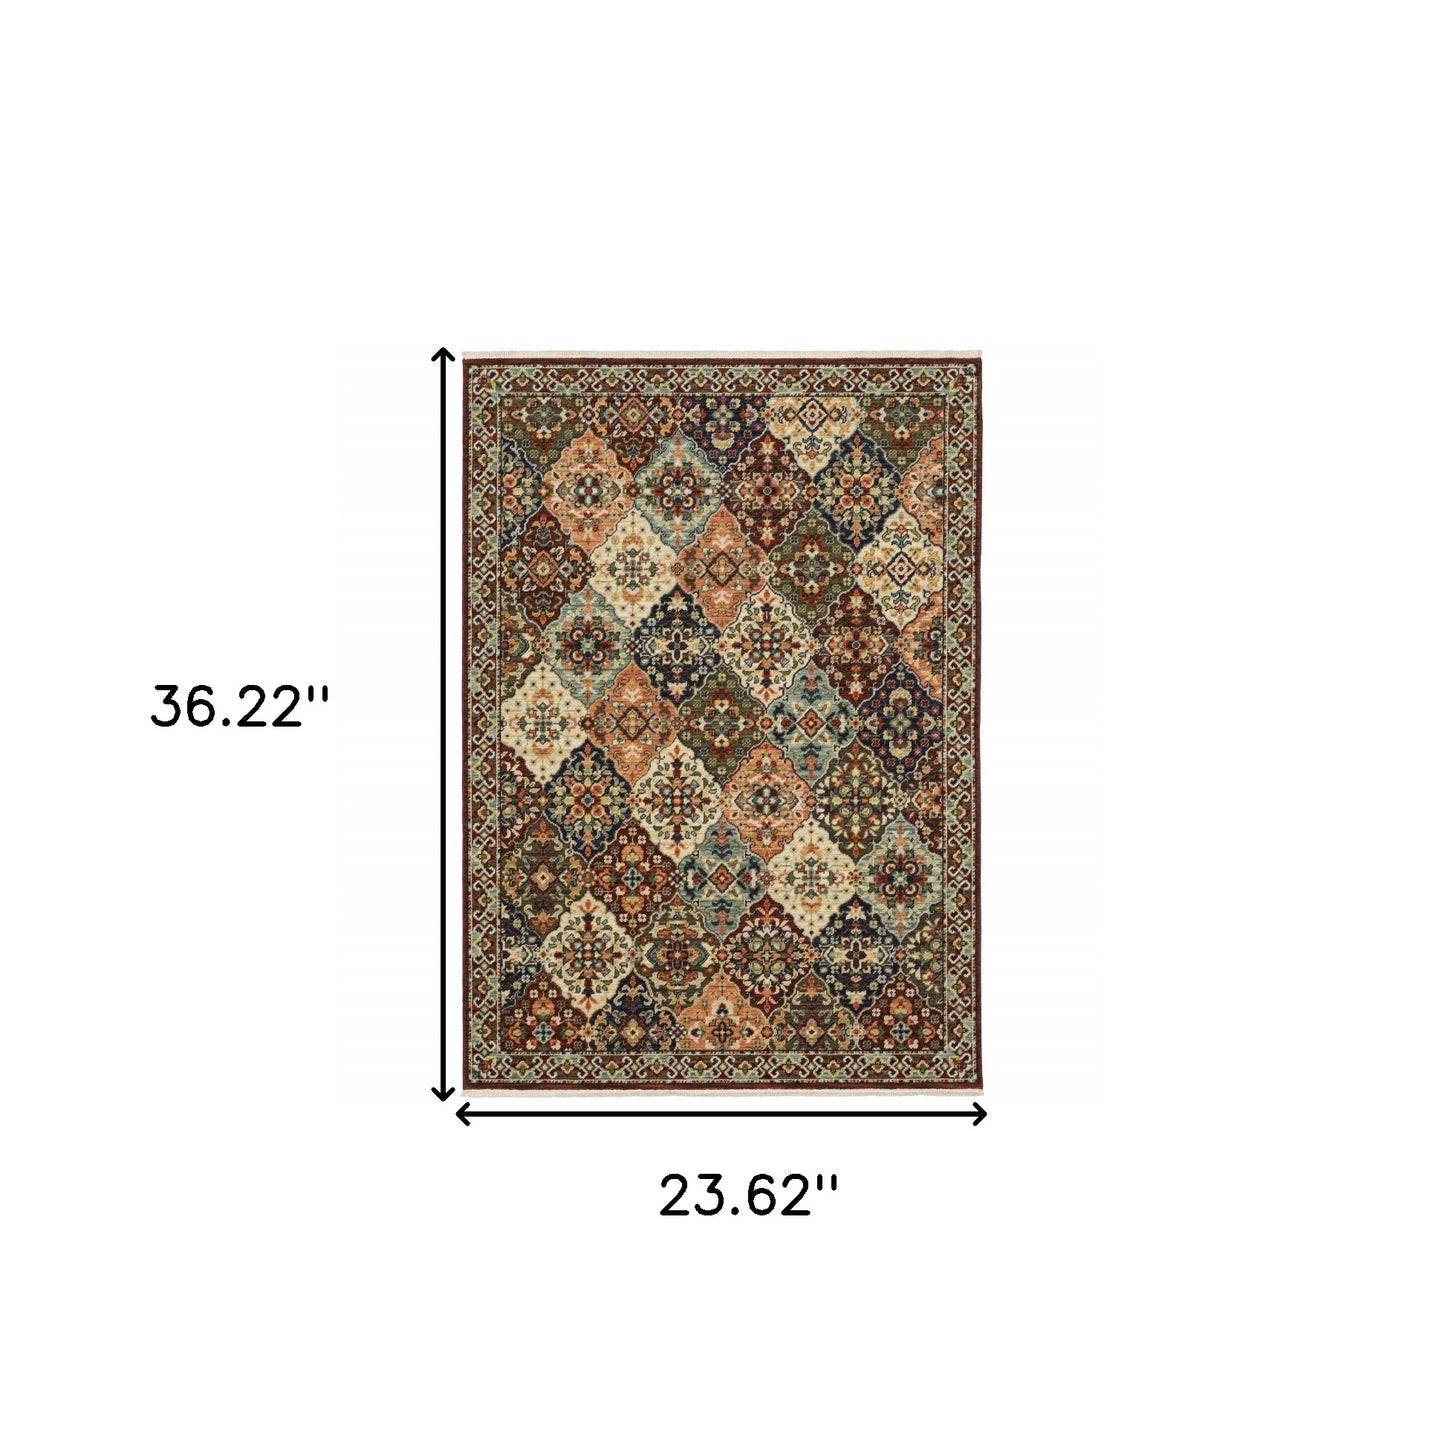 2' X 3' Red Rust Navy Light Blue Brown Orange Ivory And Gold Oriental Power Loom Stain Resistant Area Rug With Fringe